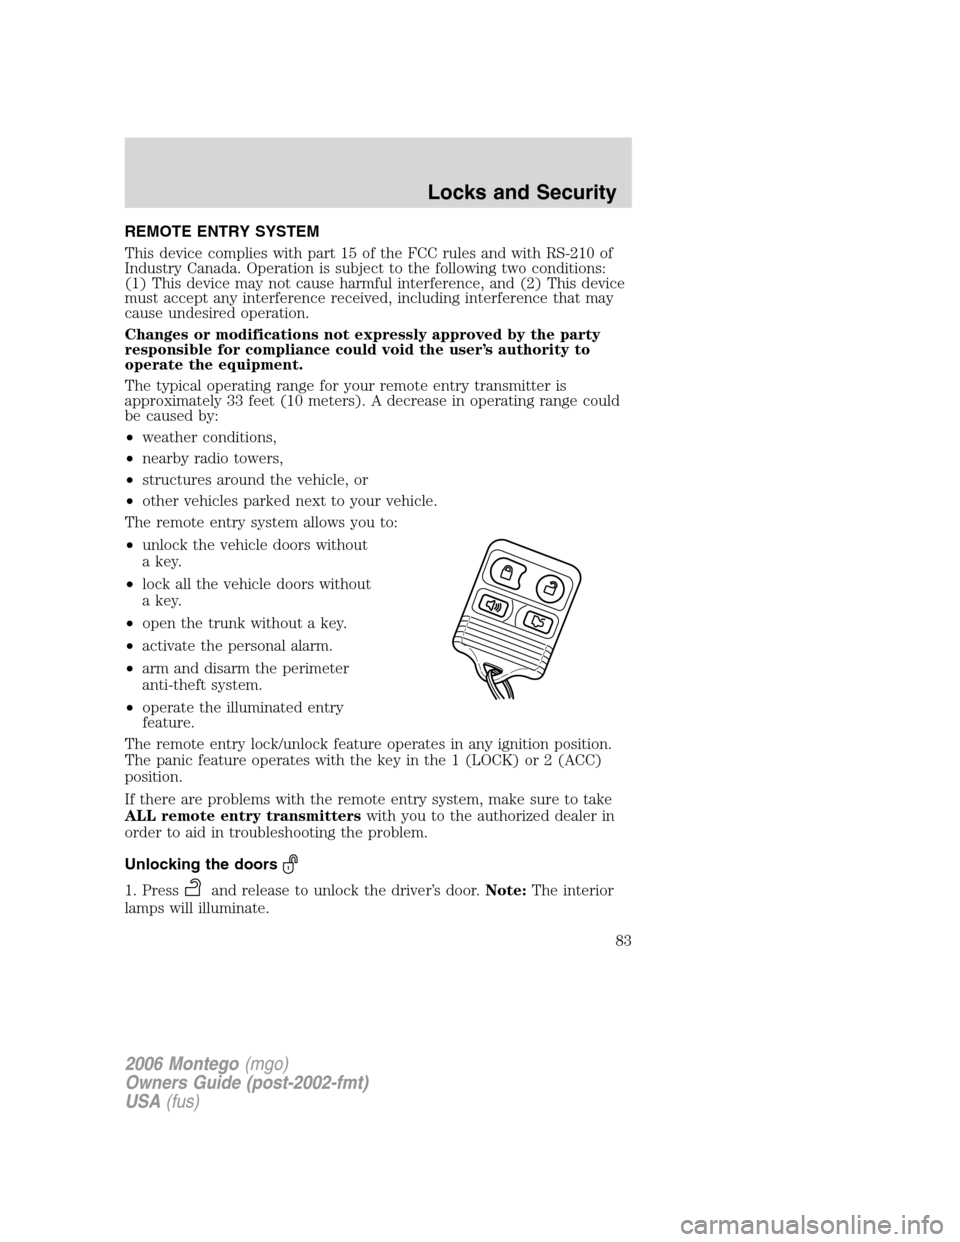 Mercury Montego 2006  Owners Manuals REMOTE ENTRY SYSTEM
This device complies with part 15 of the FCC rules and with RS-210 of
Industry Canada. Operation is subject to the following two conditions:
(1) This device may not cause harmful i